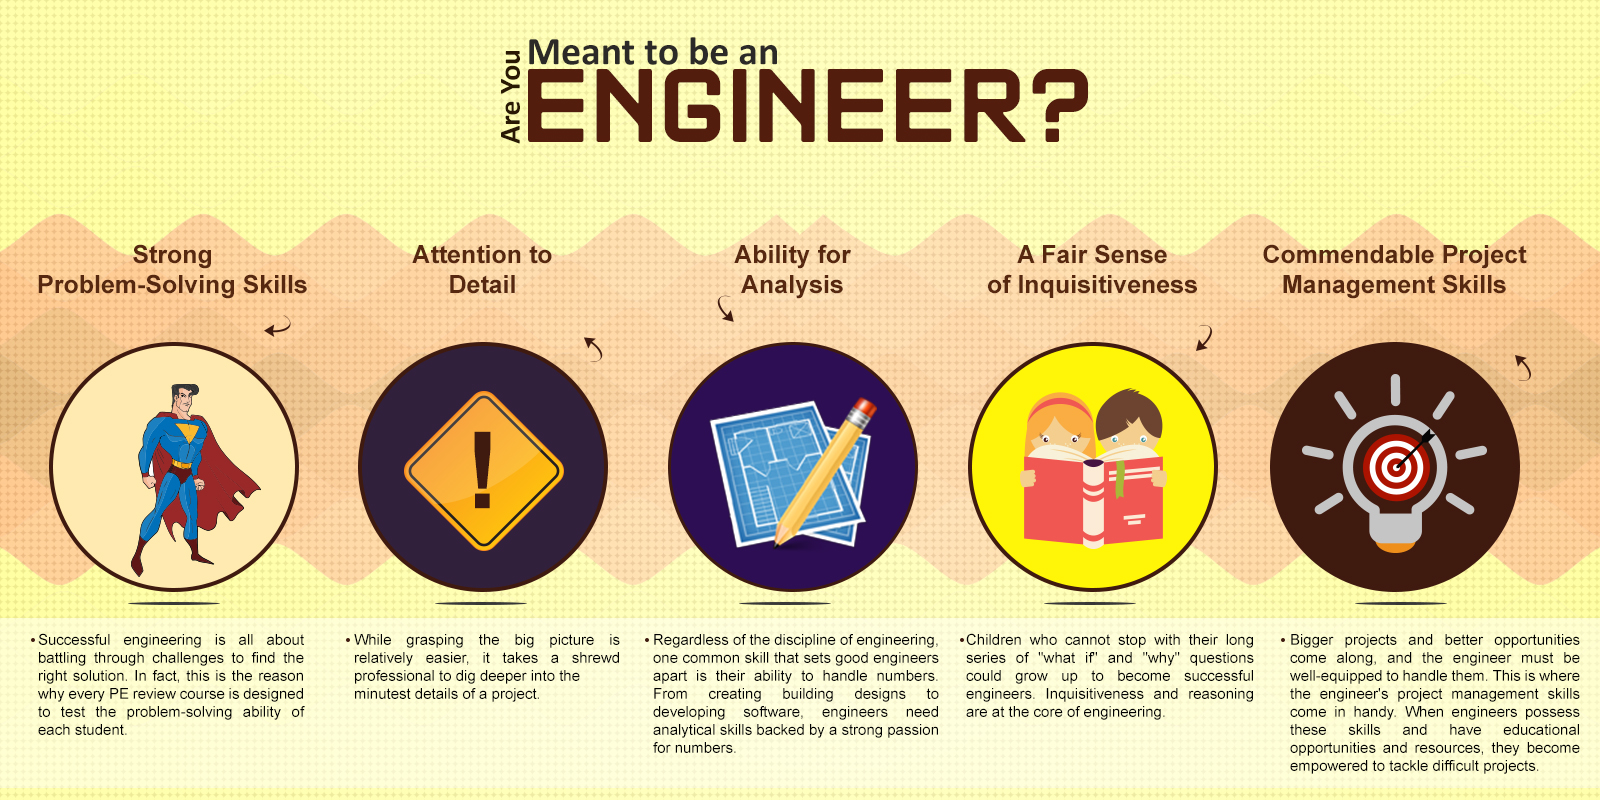 Are you meant to be an Engineer